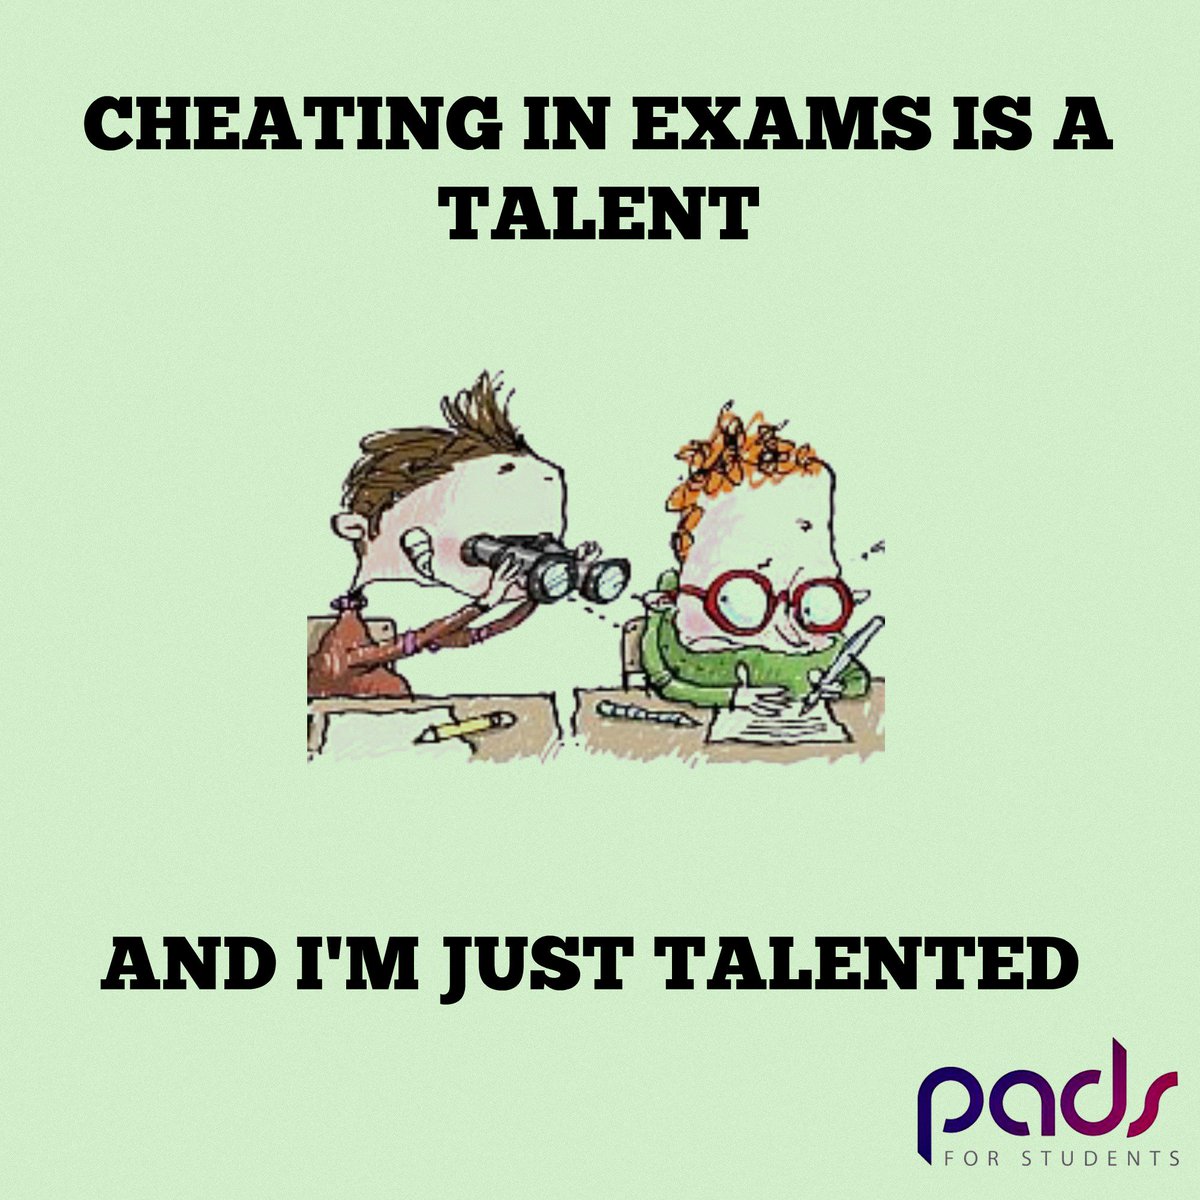 Pads For Students on Twitter " studentlife funny quotes exams university college